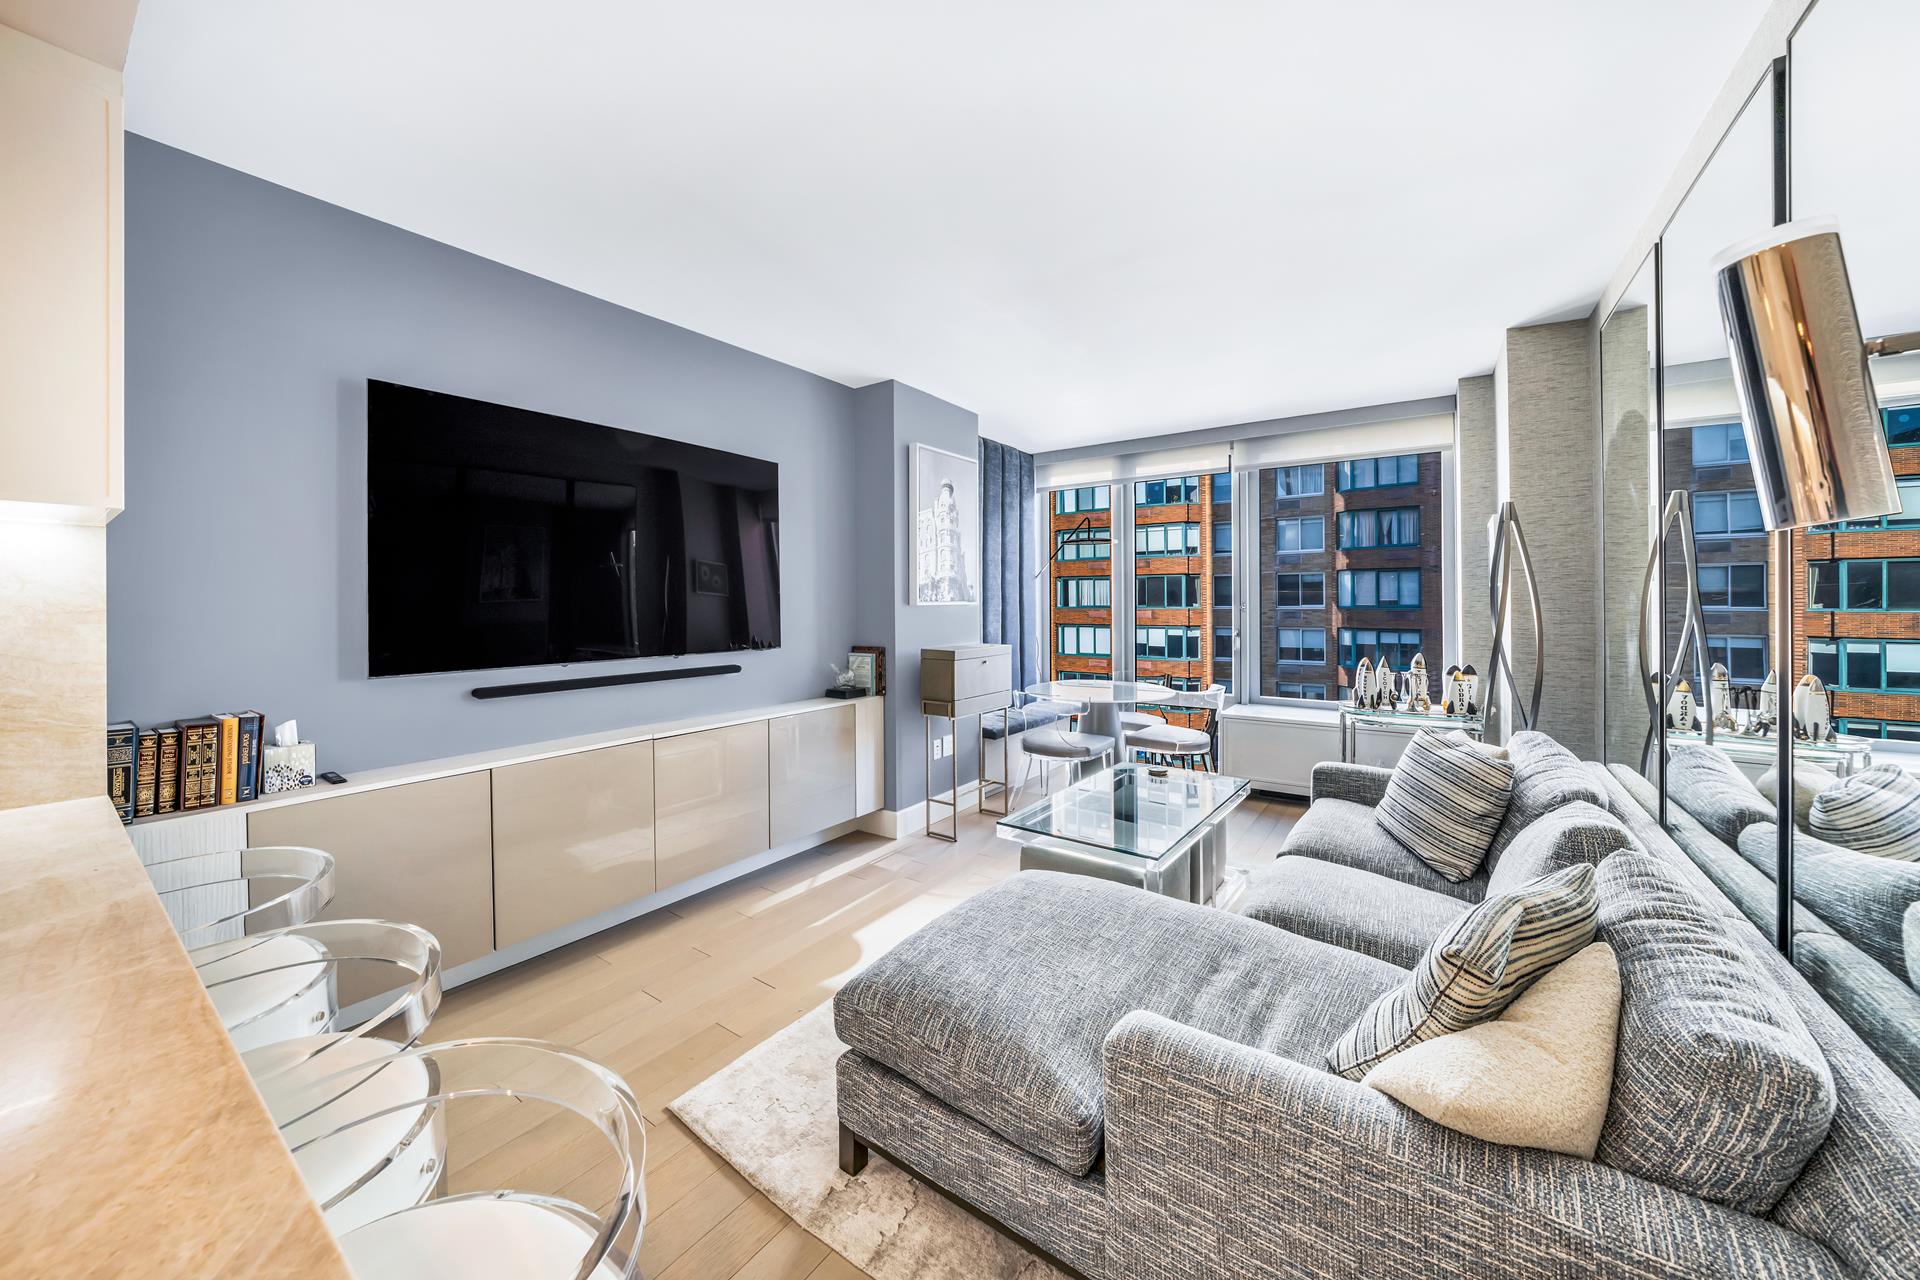 212 West 72nd Street 9C, Lincoln Sq, Upper West Side, NYC - 3 Bedrooms  
2 Bathrooms  
5 Rooms - 